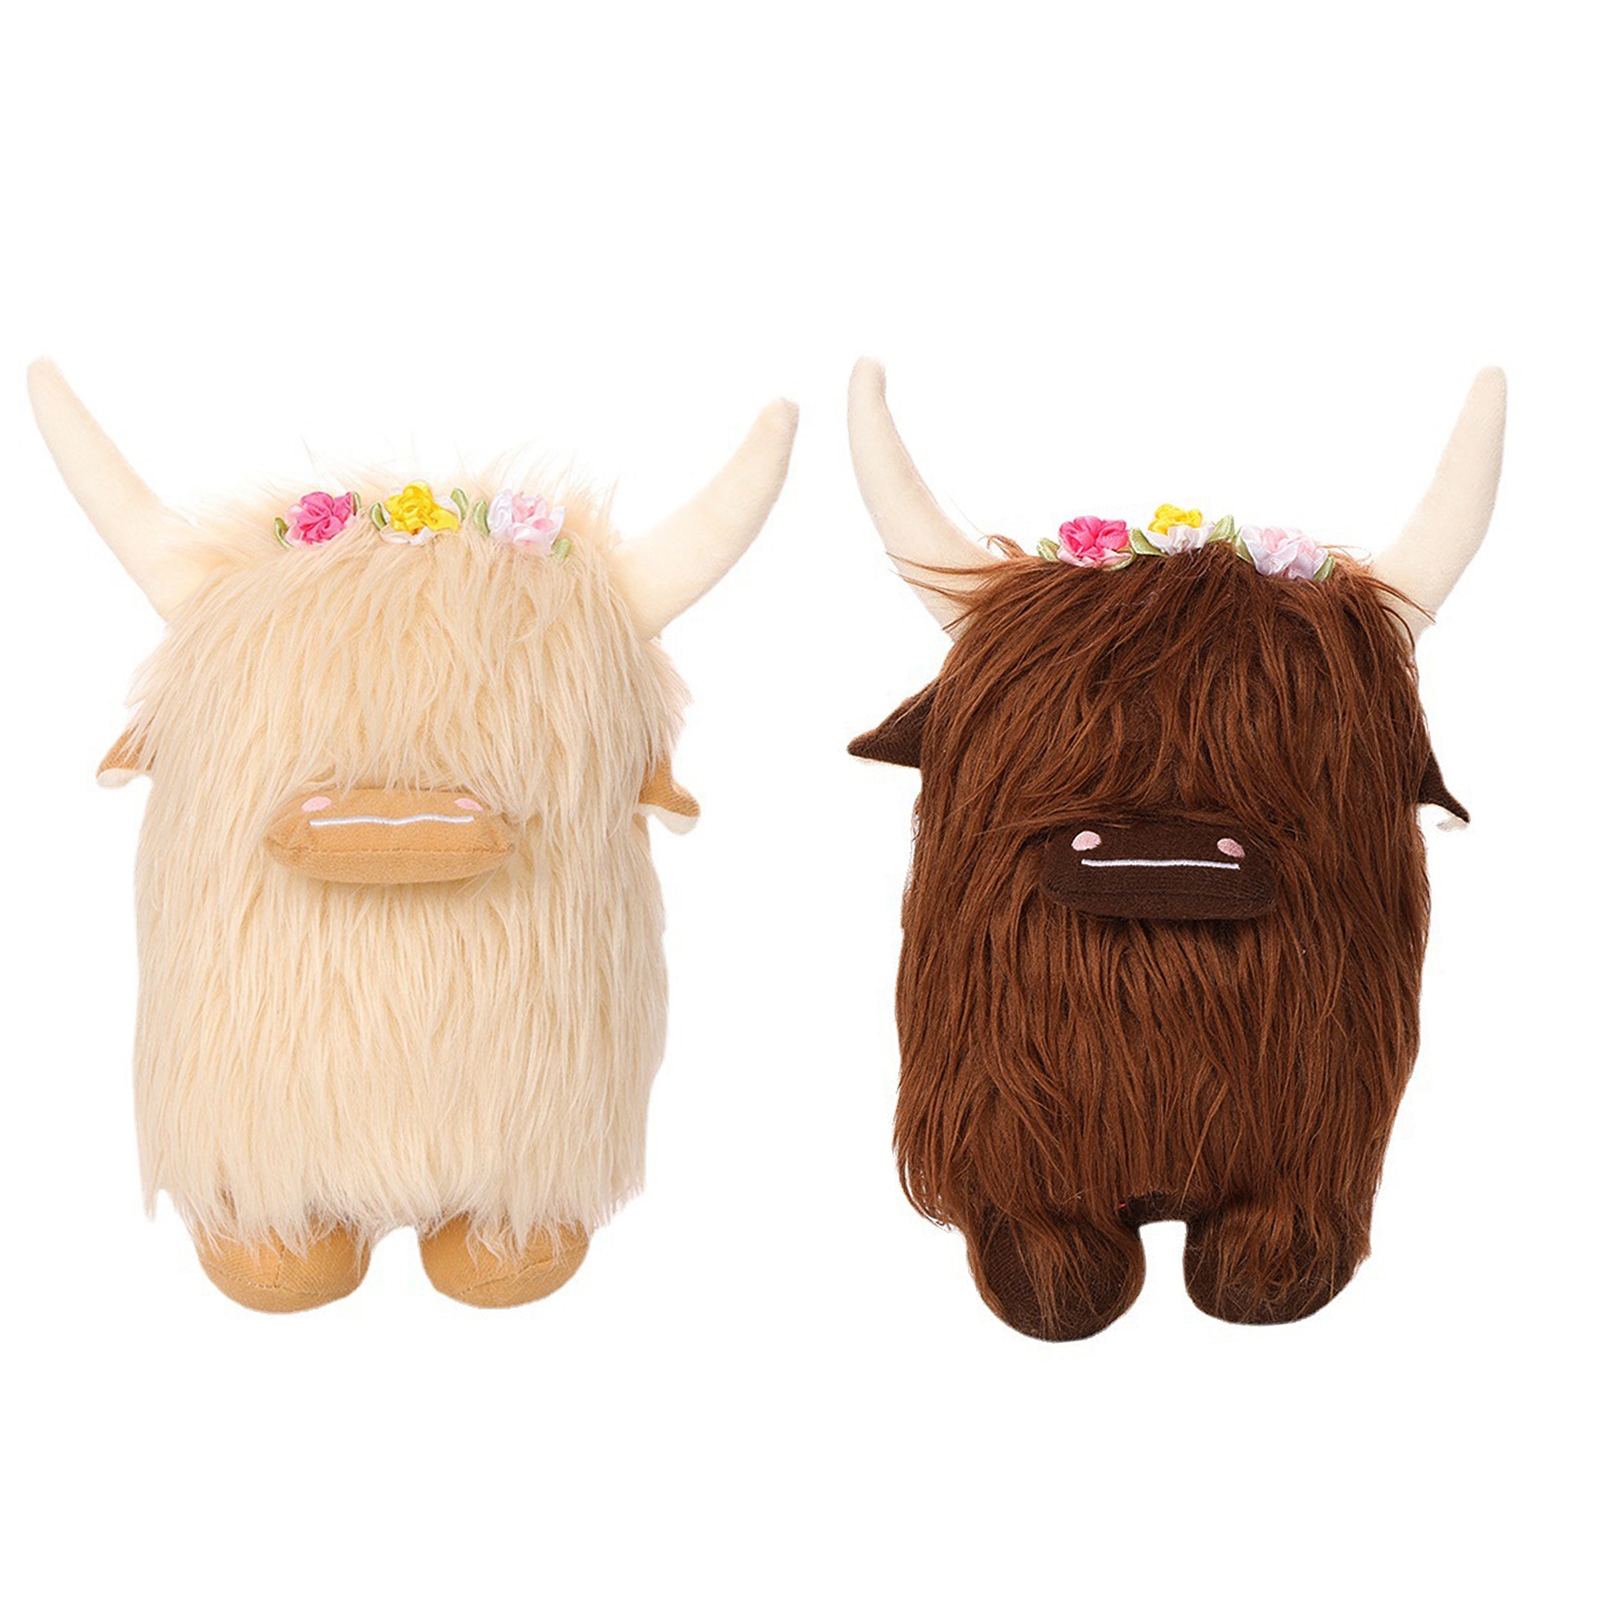 Highland Cow Goat Plush Simulated Brown, Black, And White Cows Cute Dolls  Ornaments For Kids Perfect Birthday Gift From Hy0110, $6.47